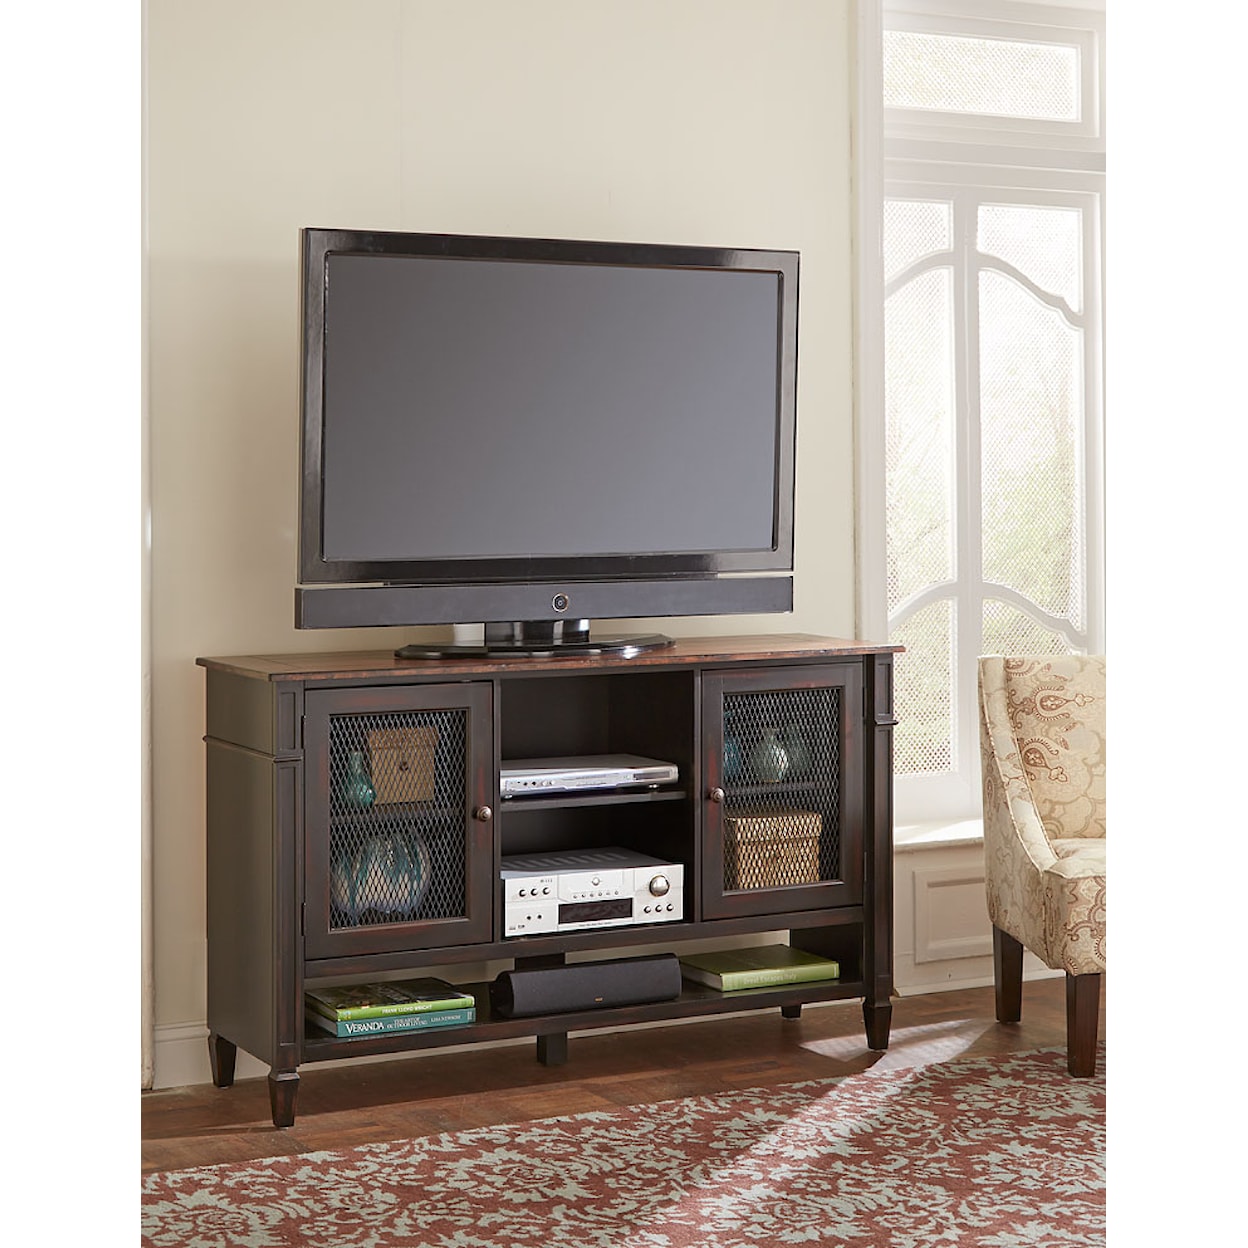 Martin Home Furnishings Eclectic Home Entertainment & Storage Deluxe TV Console